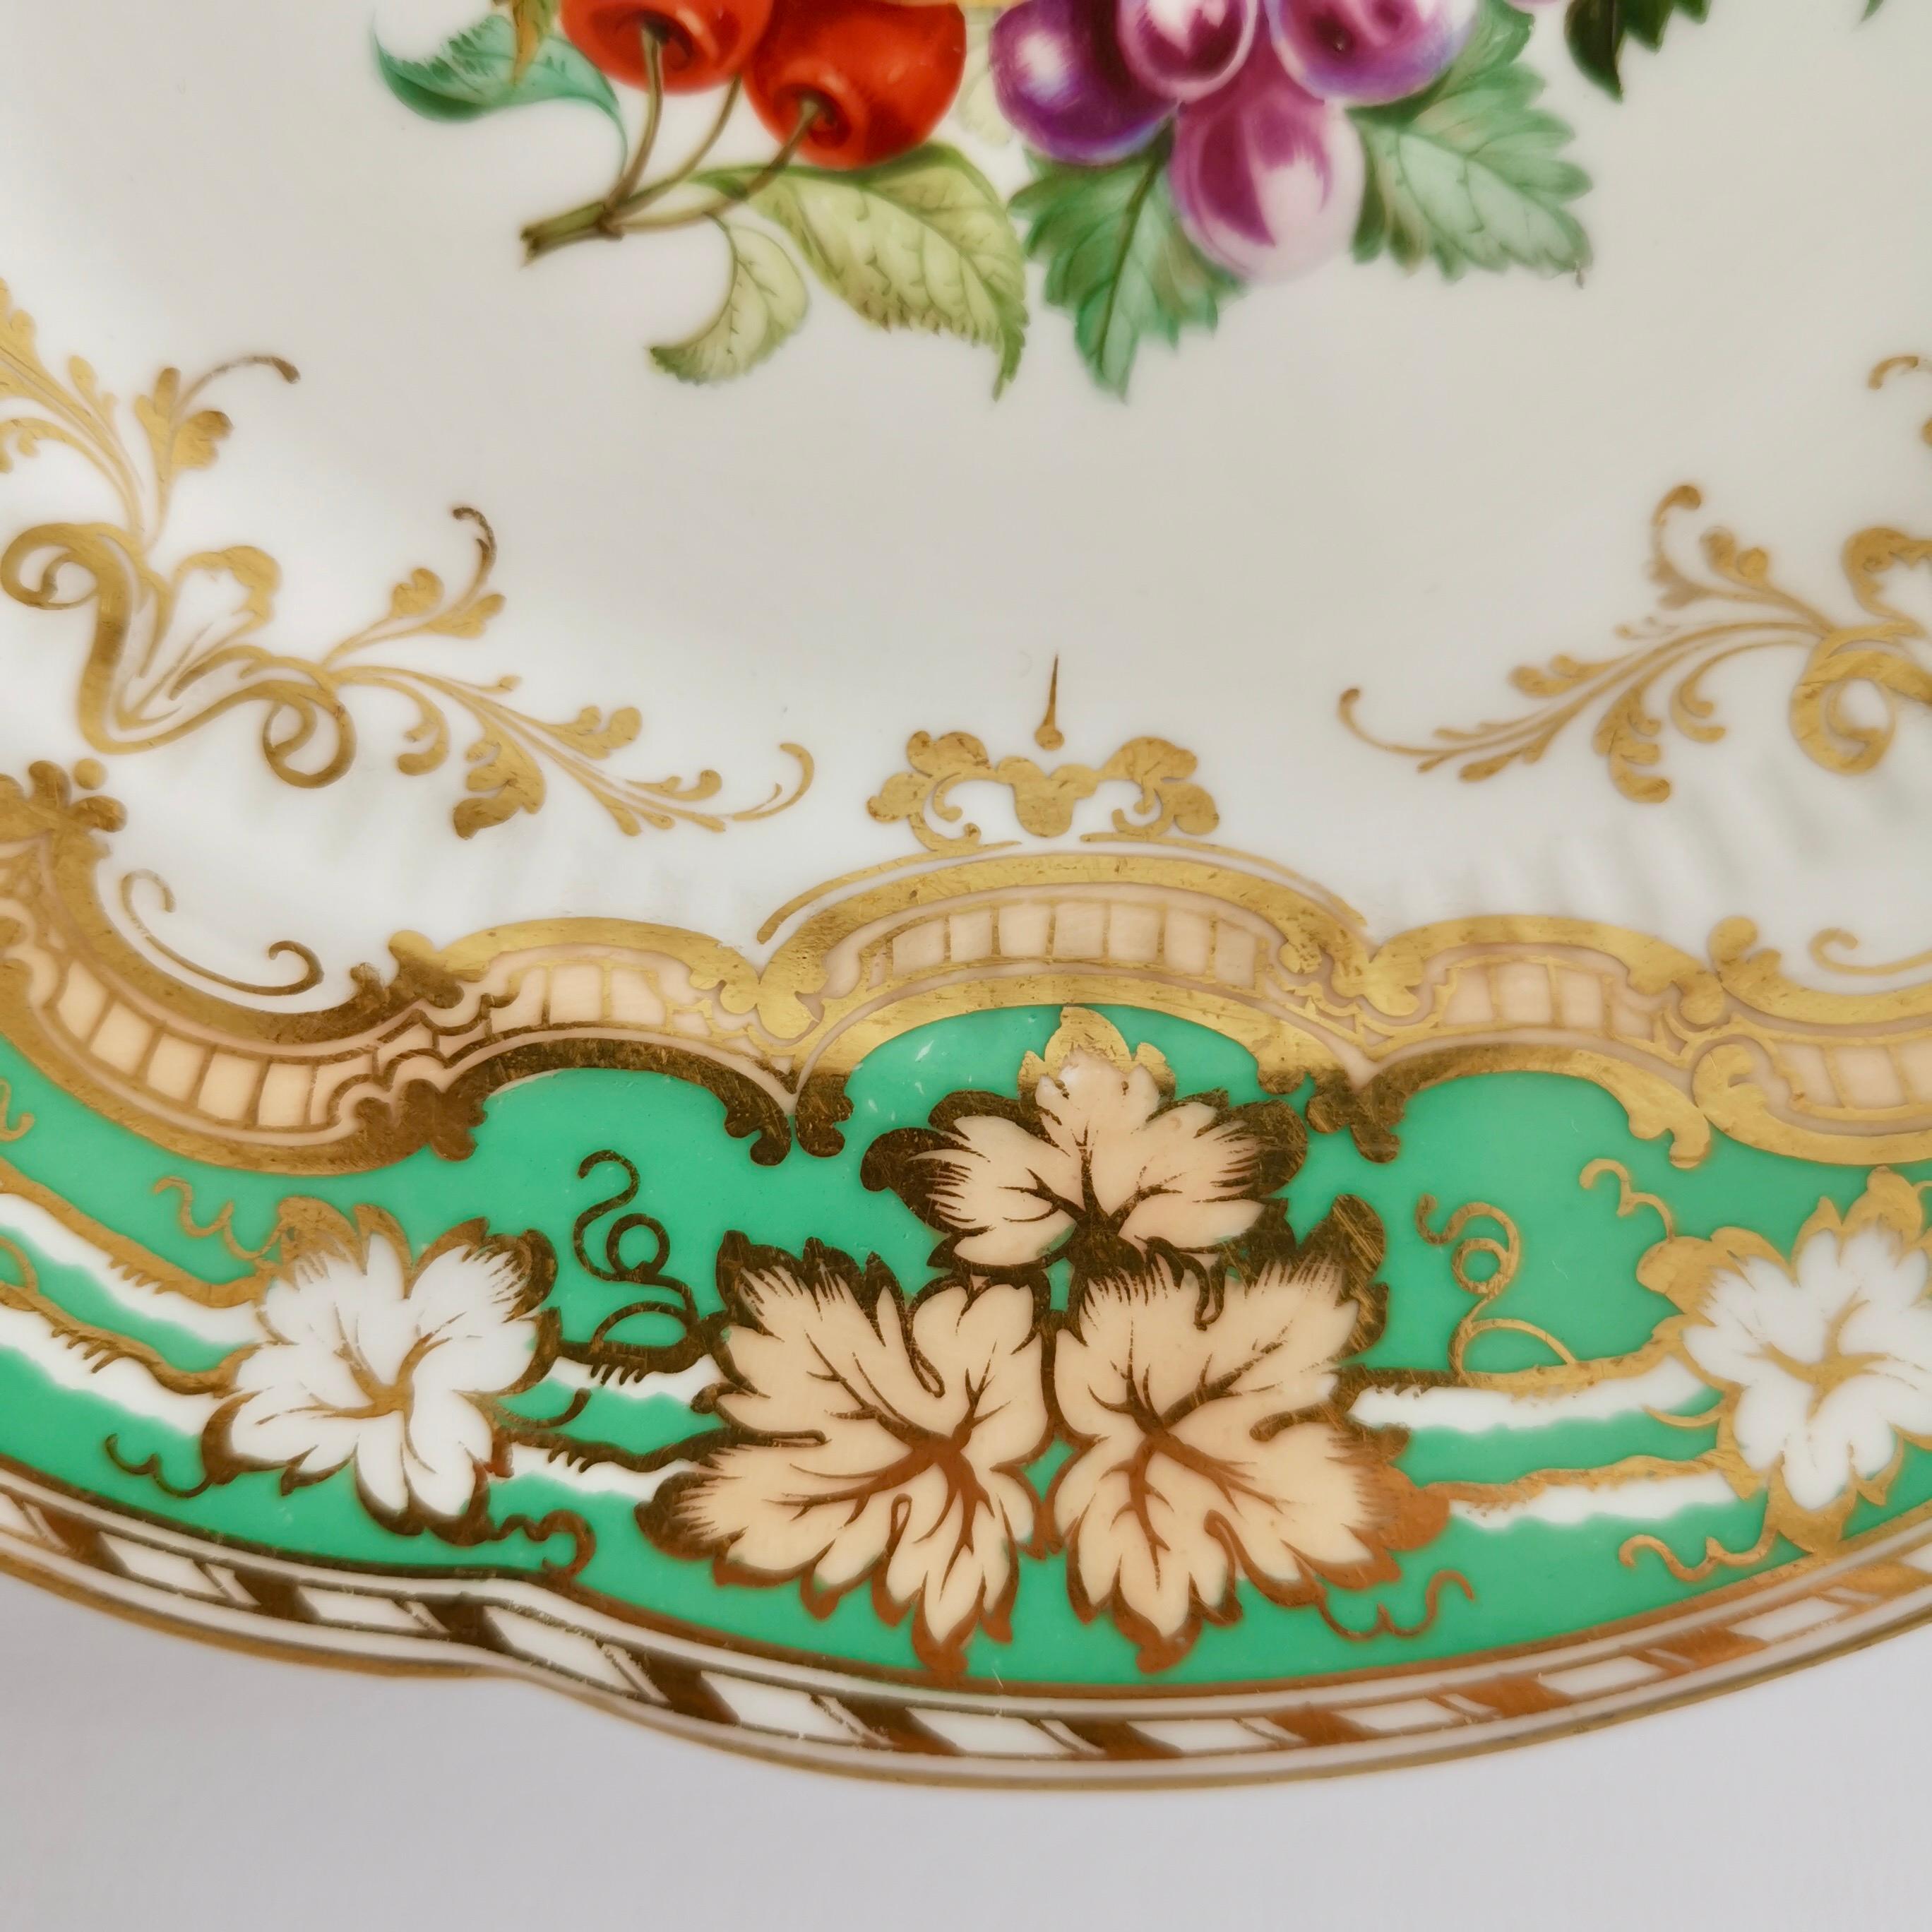 Ridgway Plate, Emerald Green, Gilt and Sublime Hand Painted Fruits, ca 1853 2